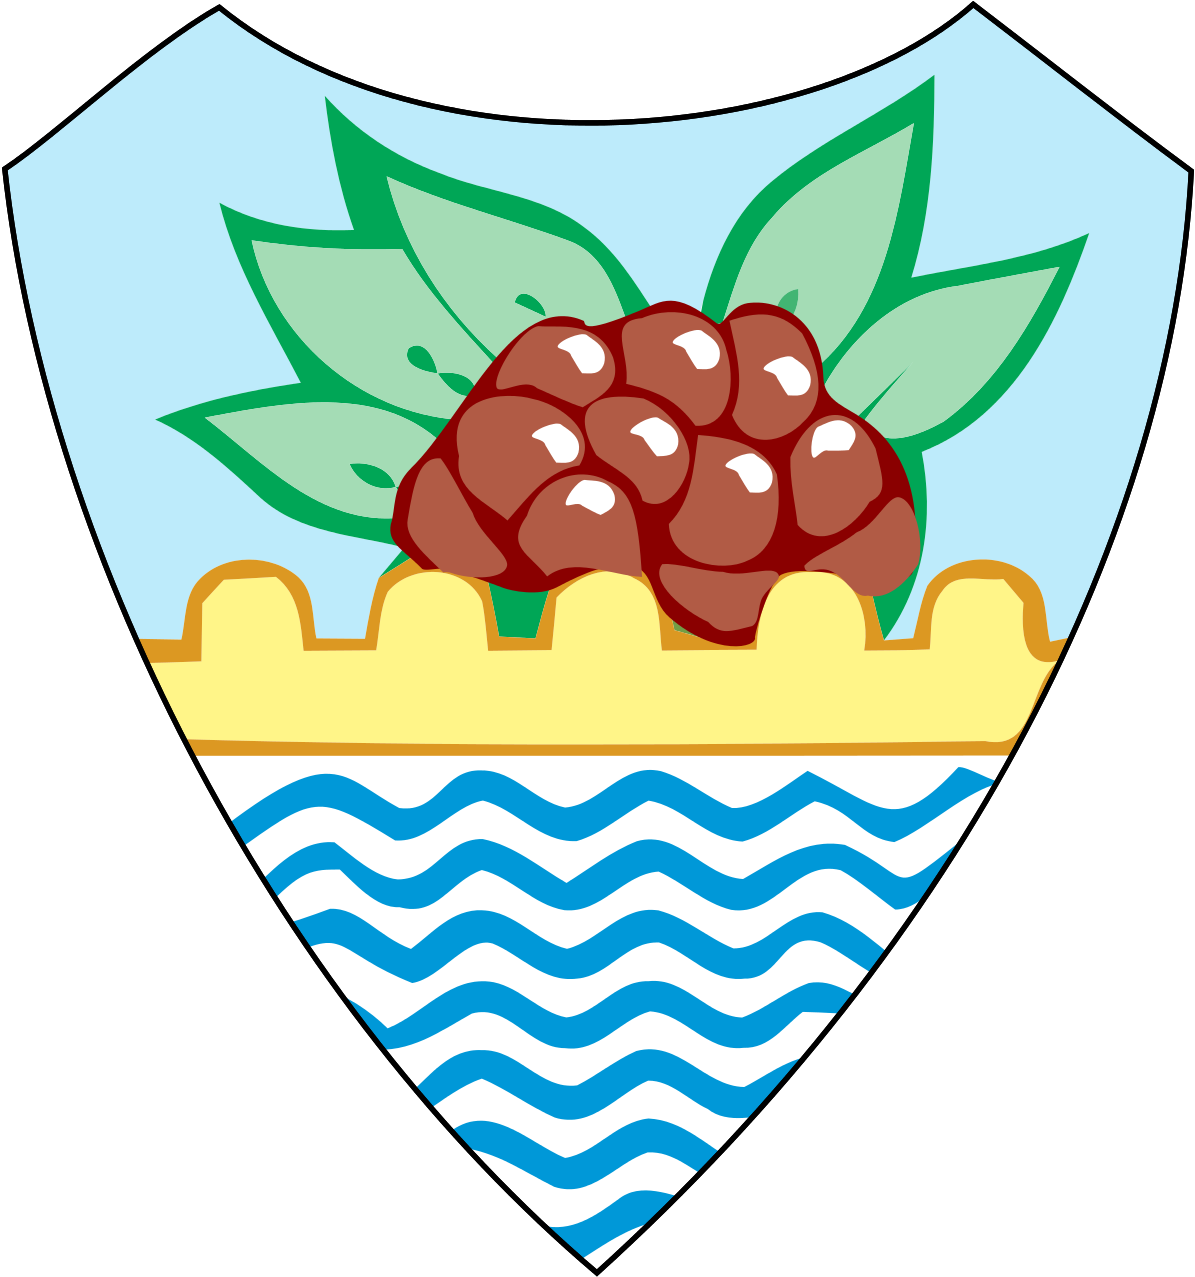 Depiction Of The Dam On The Coats Of Arms Of Yemen - Marib Dam (1200x1283)